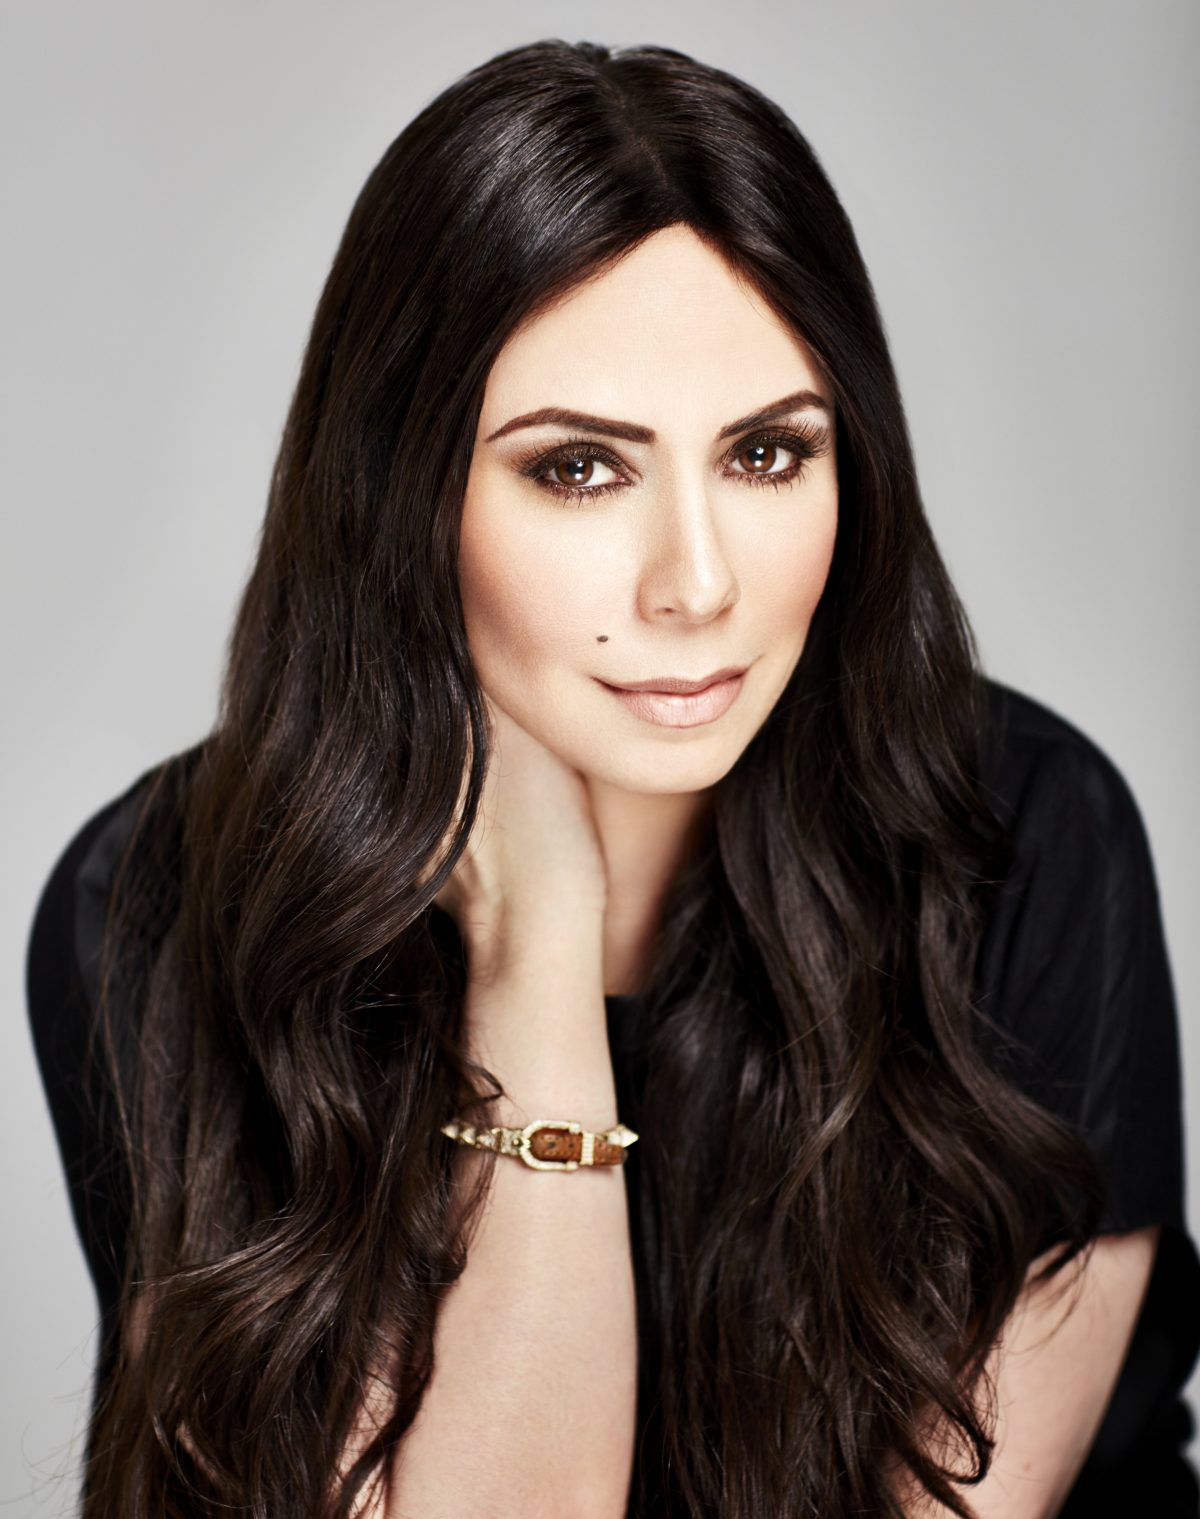 Five Rules For Life: Dineh Mohajer, Co-Founder and Creative Director of Smith & Cult